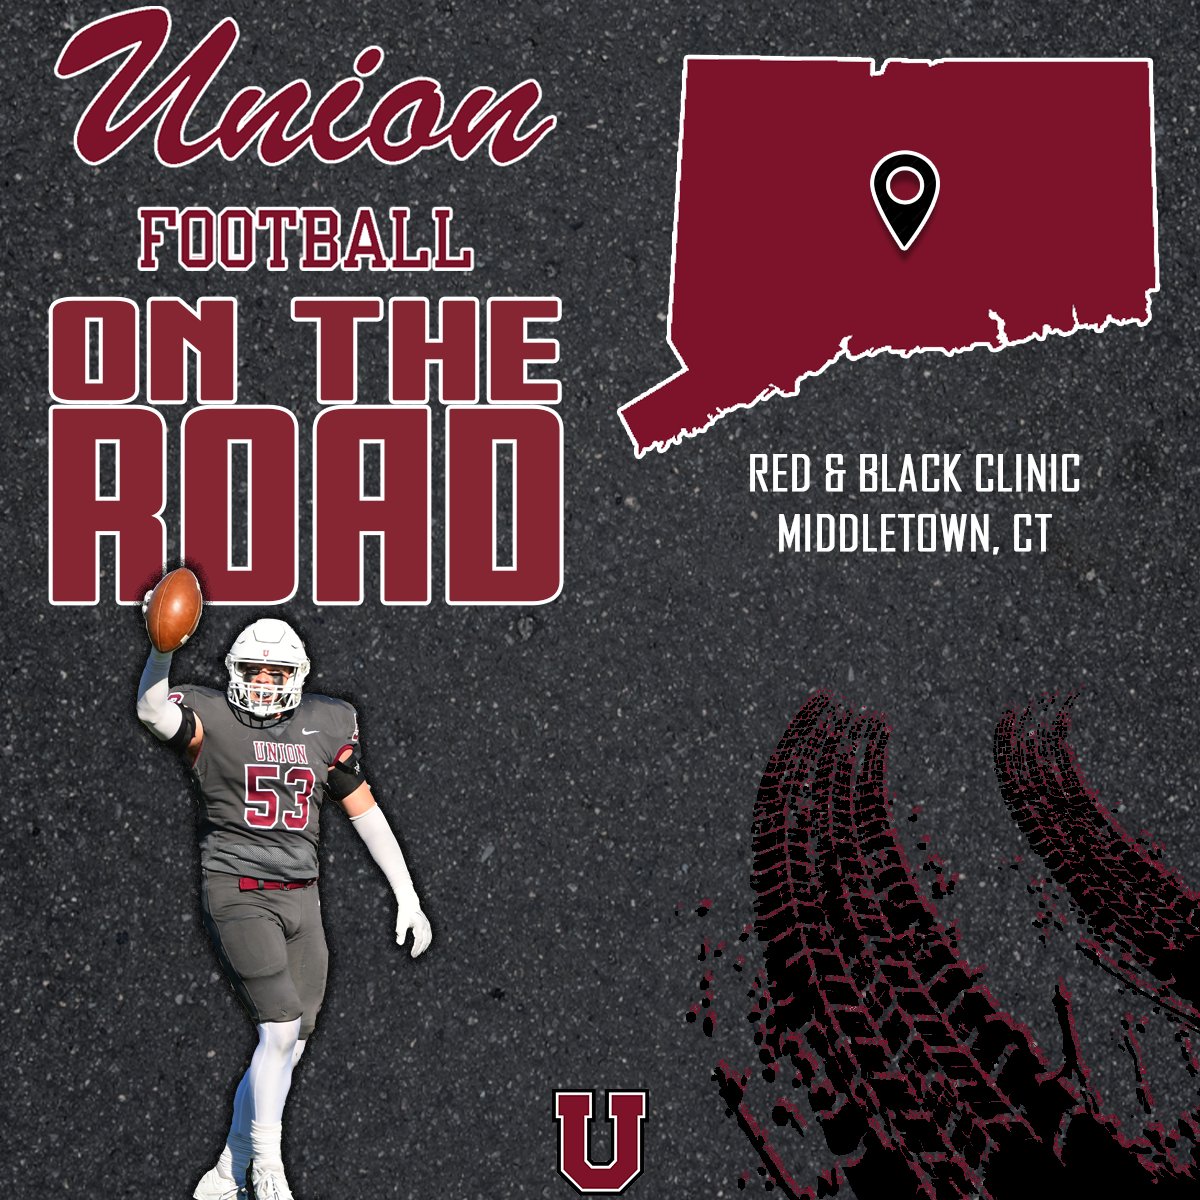 𝙊𝙉 𝙏𝙃𝙀 𝙍𝙊𝘼𝘿 Our staff will be in attendance and evaluating top talent at tomorrows Red & Black Clinic. #FTC #1Percent #GoU